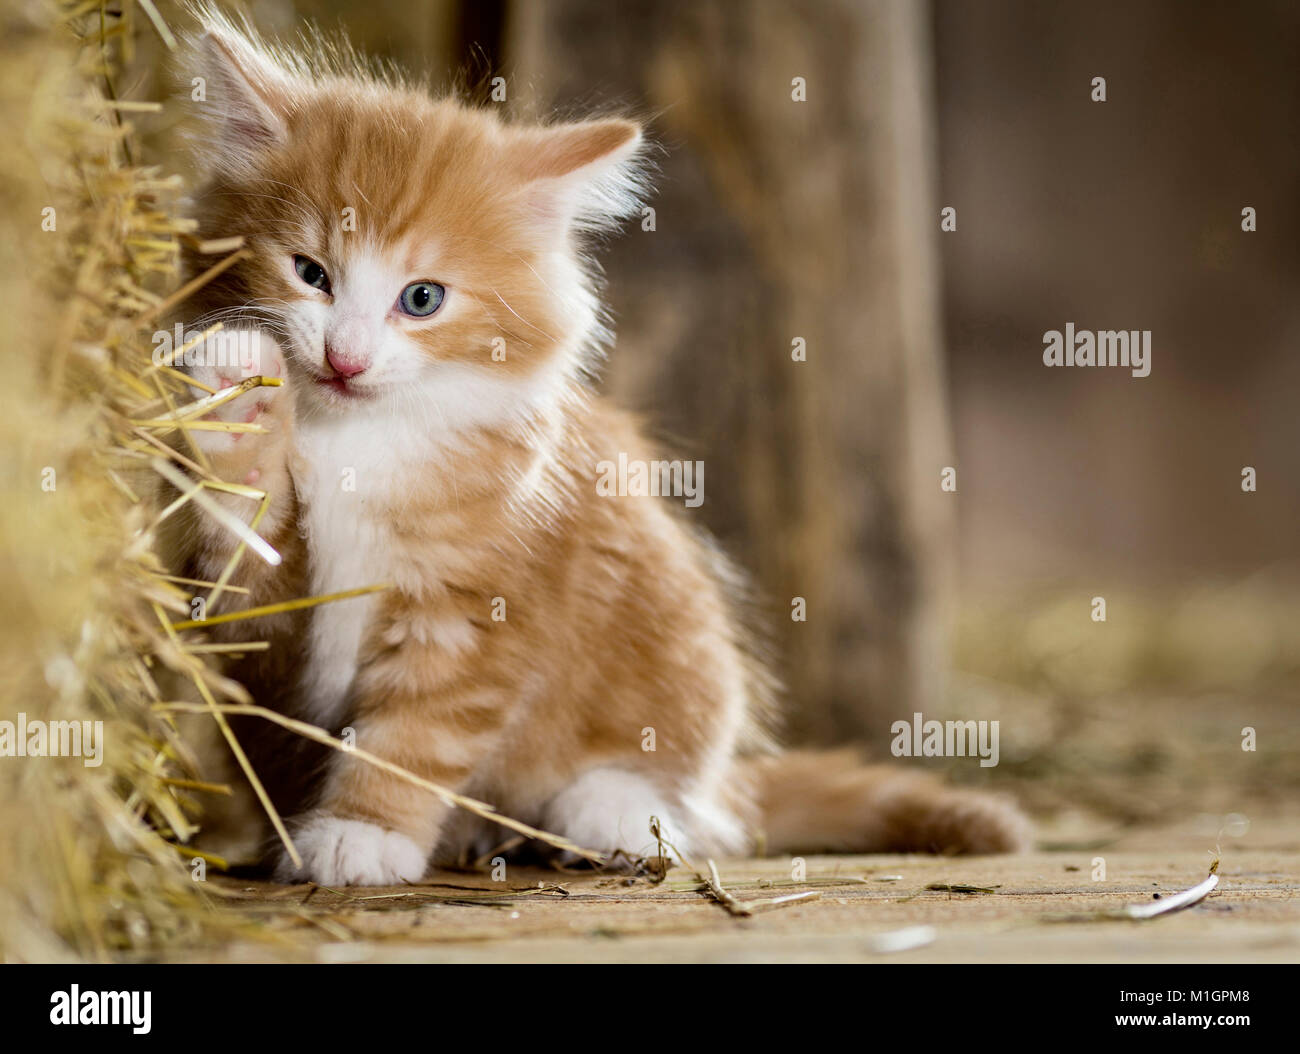 https://c8.alamy.com/comp/M1GPM8/norwegian-forest-cat-kitten-in-a-barn-playing-with-straw-germany-M1GPM8.jpg